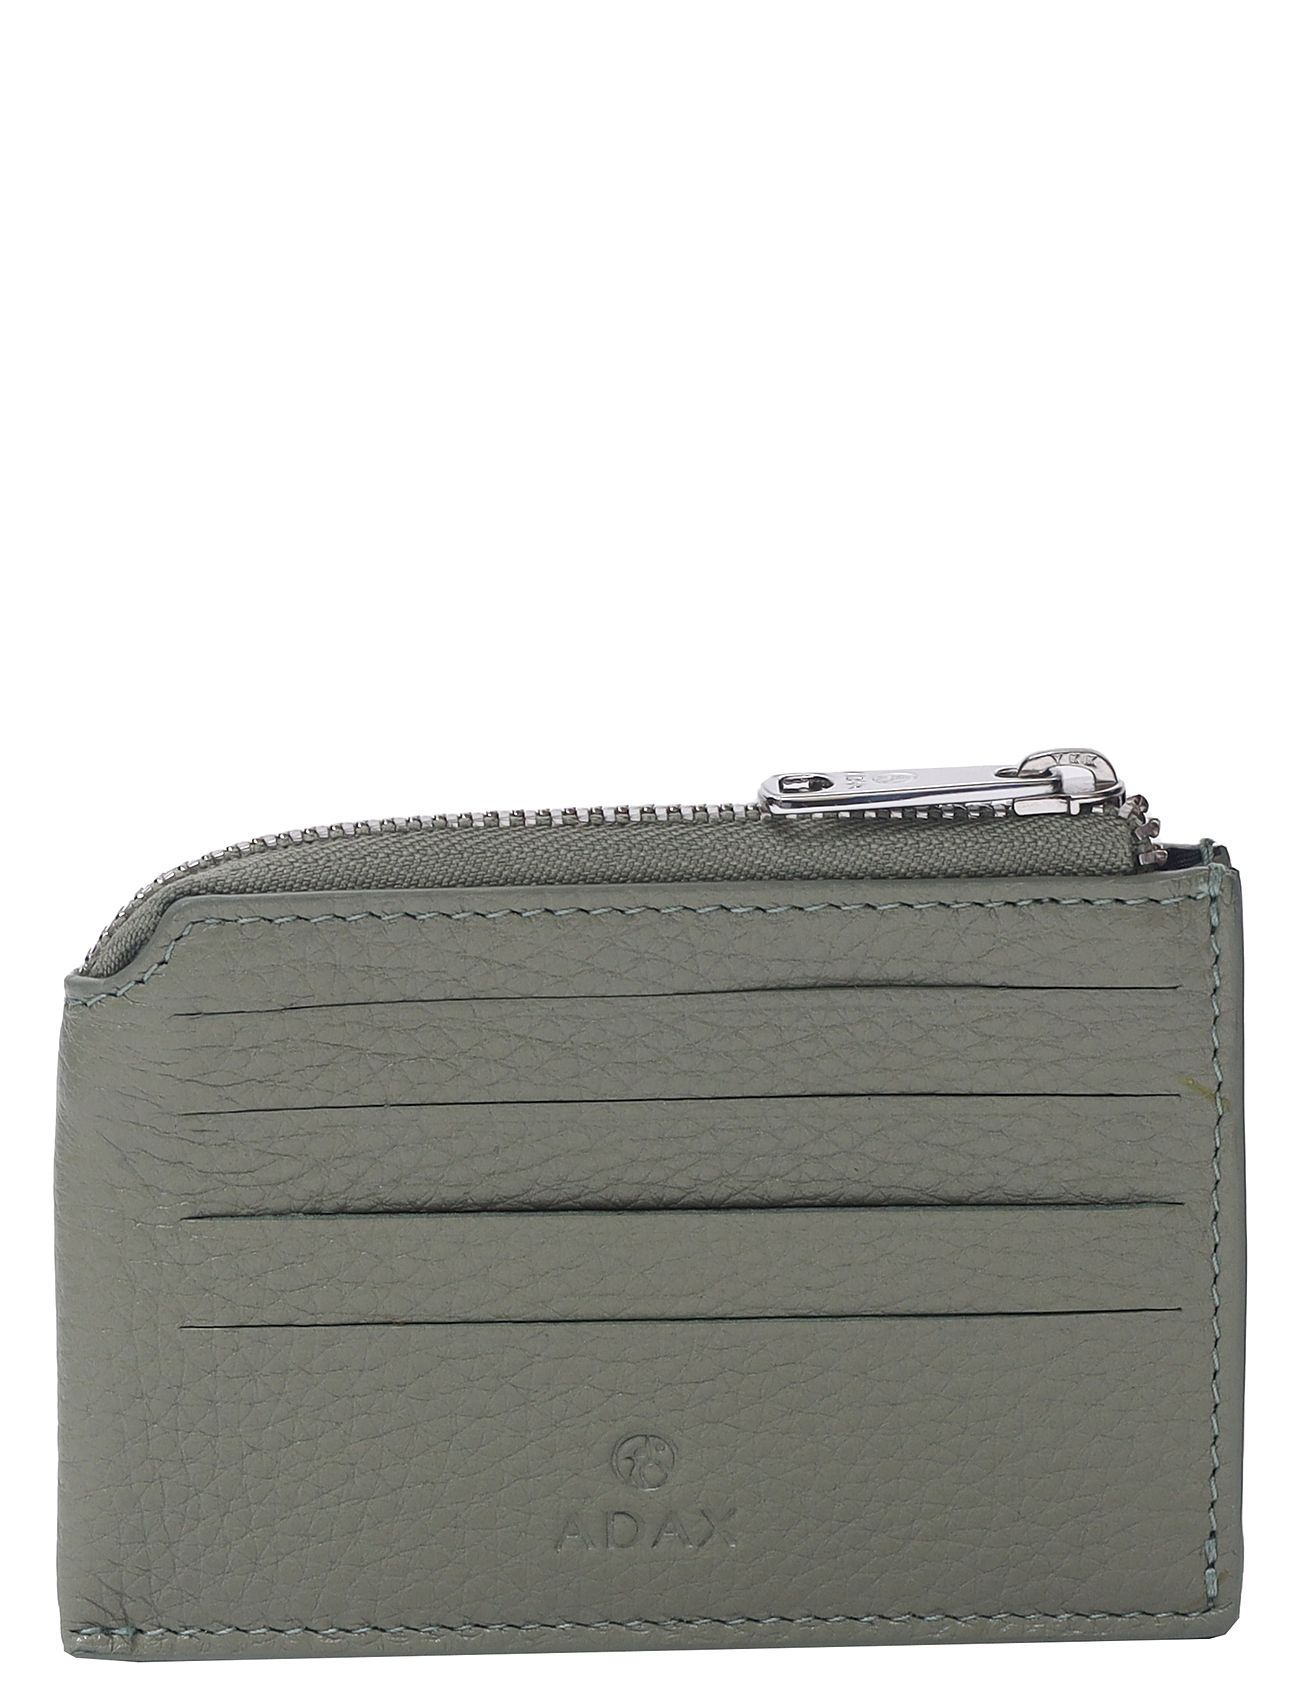 Cormorano Credit Card Holder Susy Bags Card Holders & Wallets Card Holder Green Adax